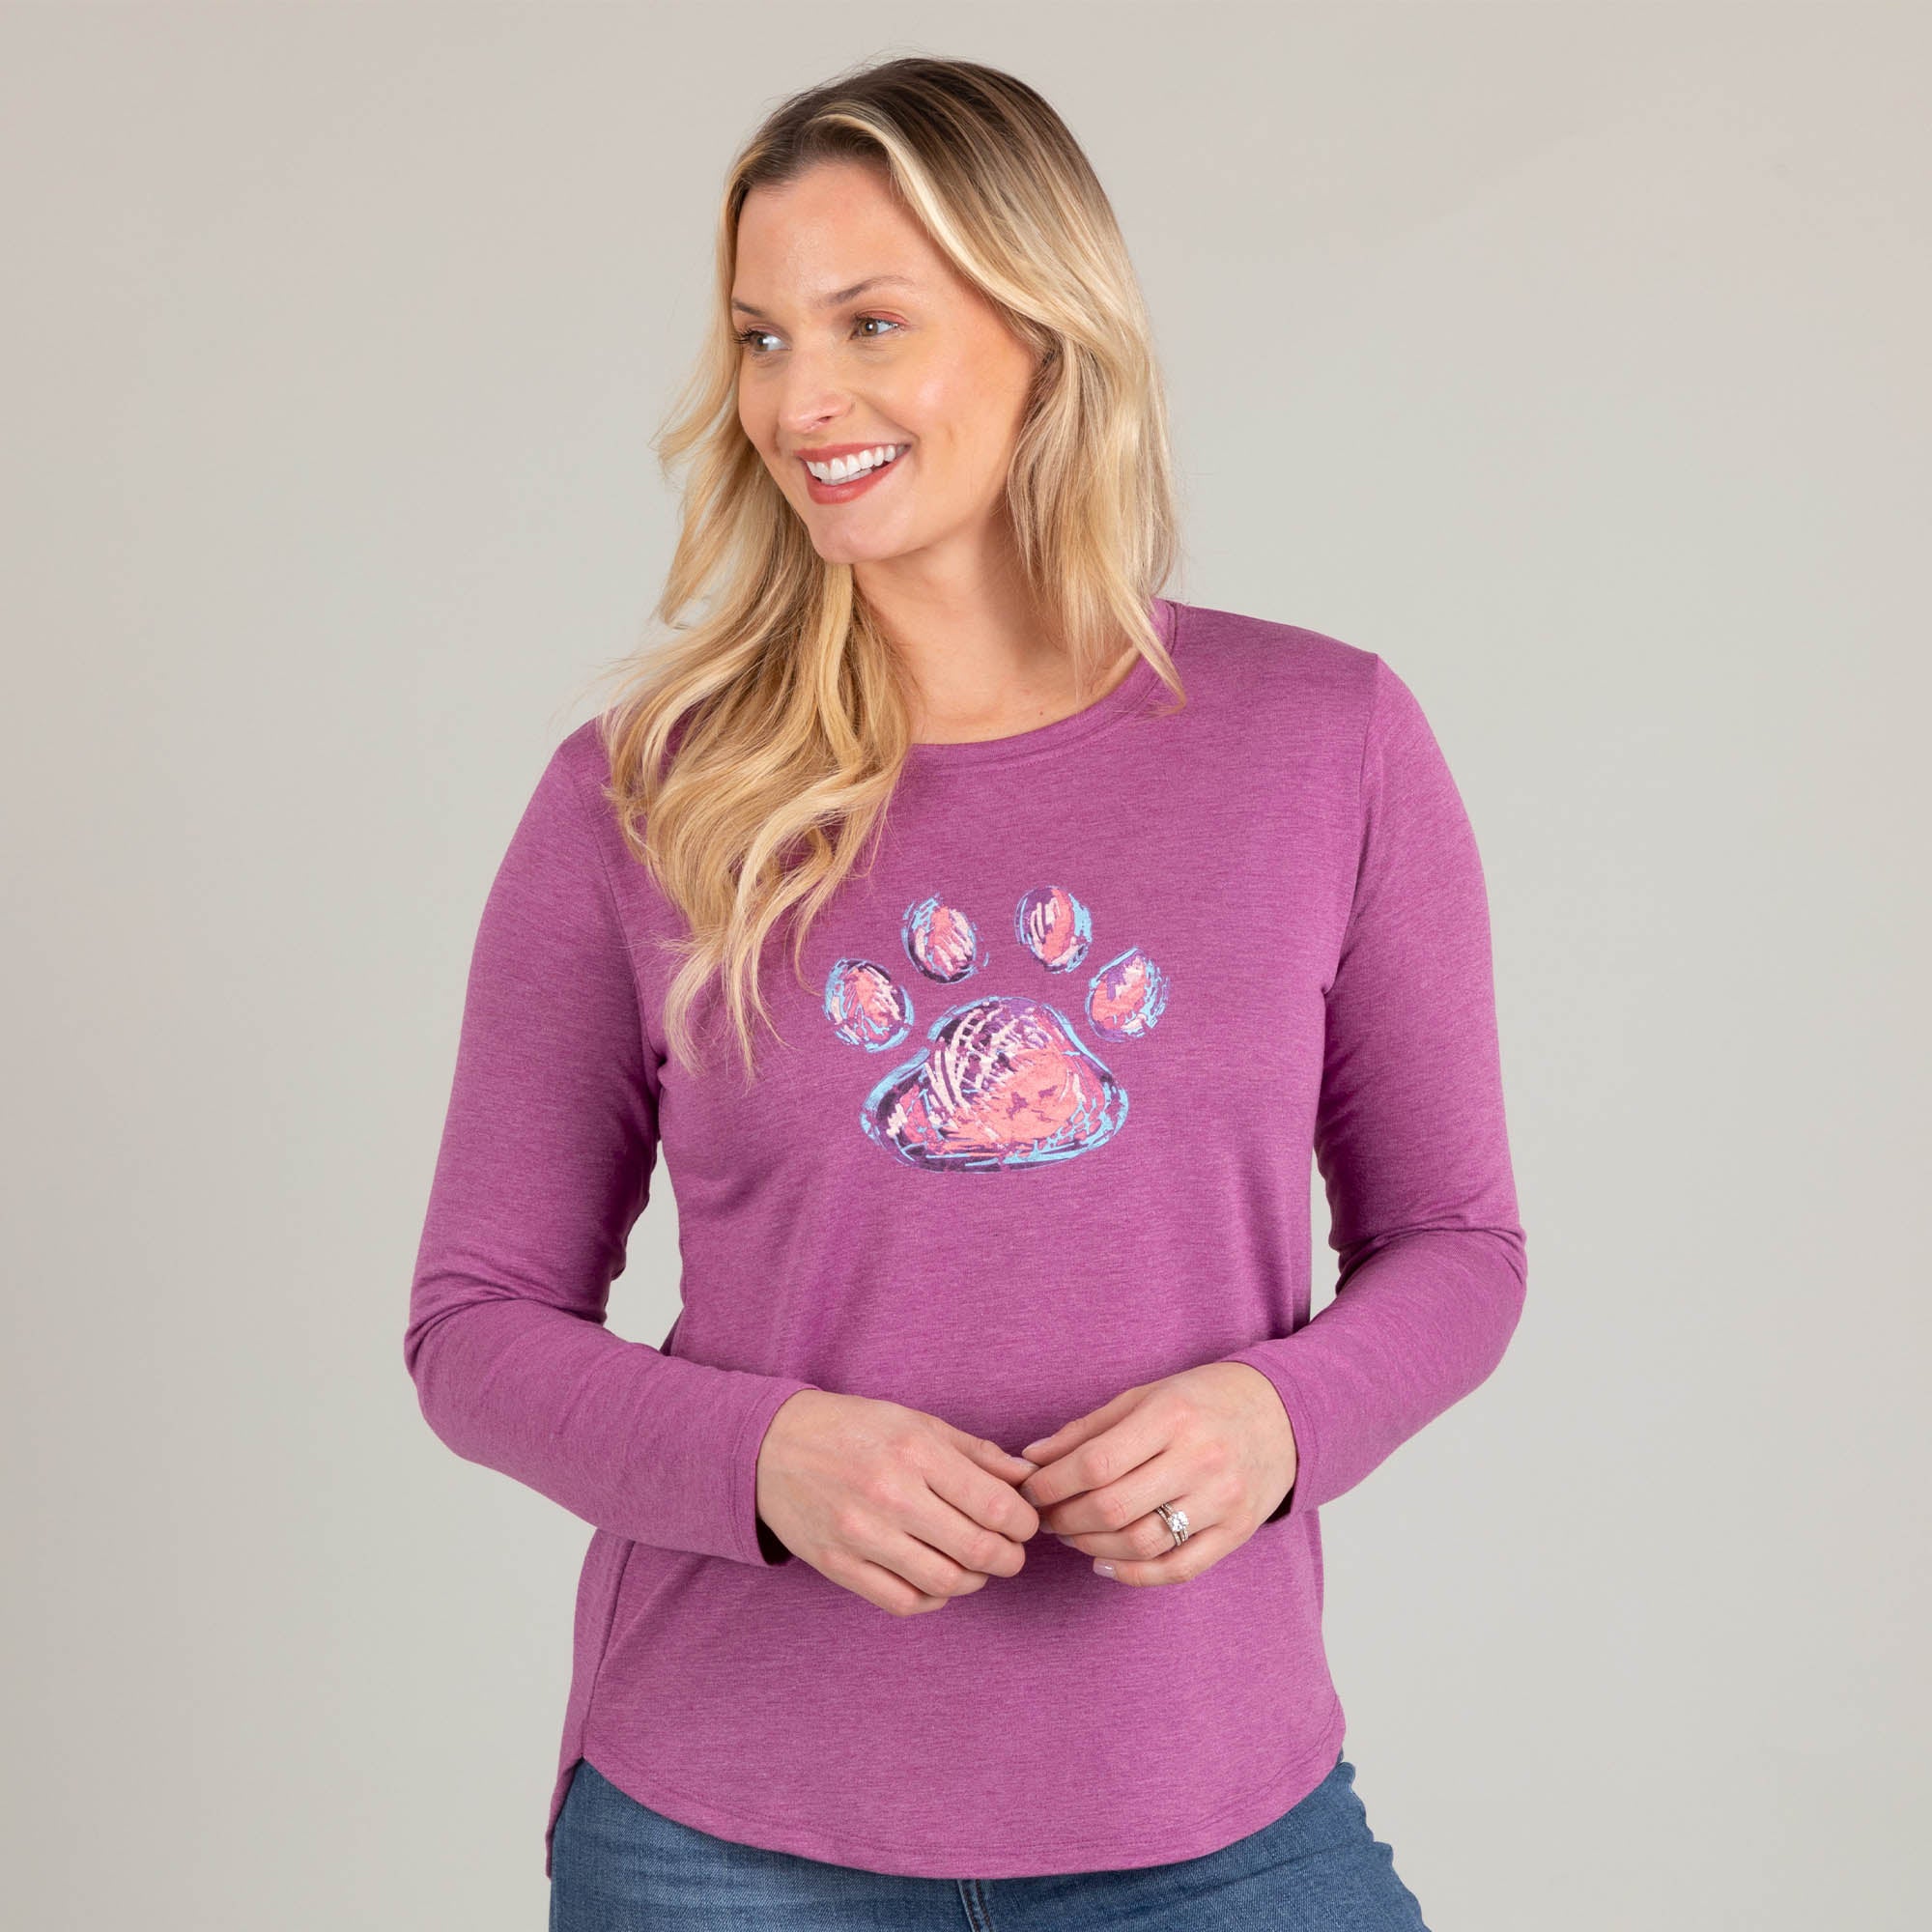 Paw Print French Terry Scoop Neck Top - XXL